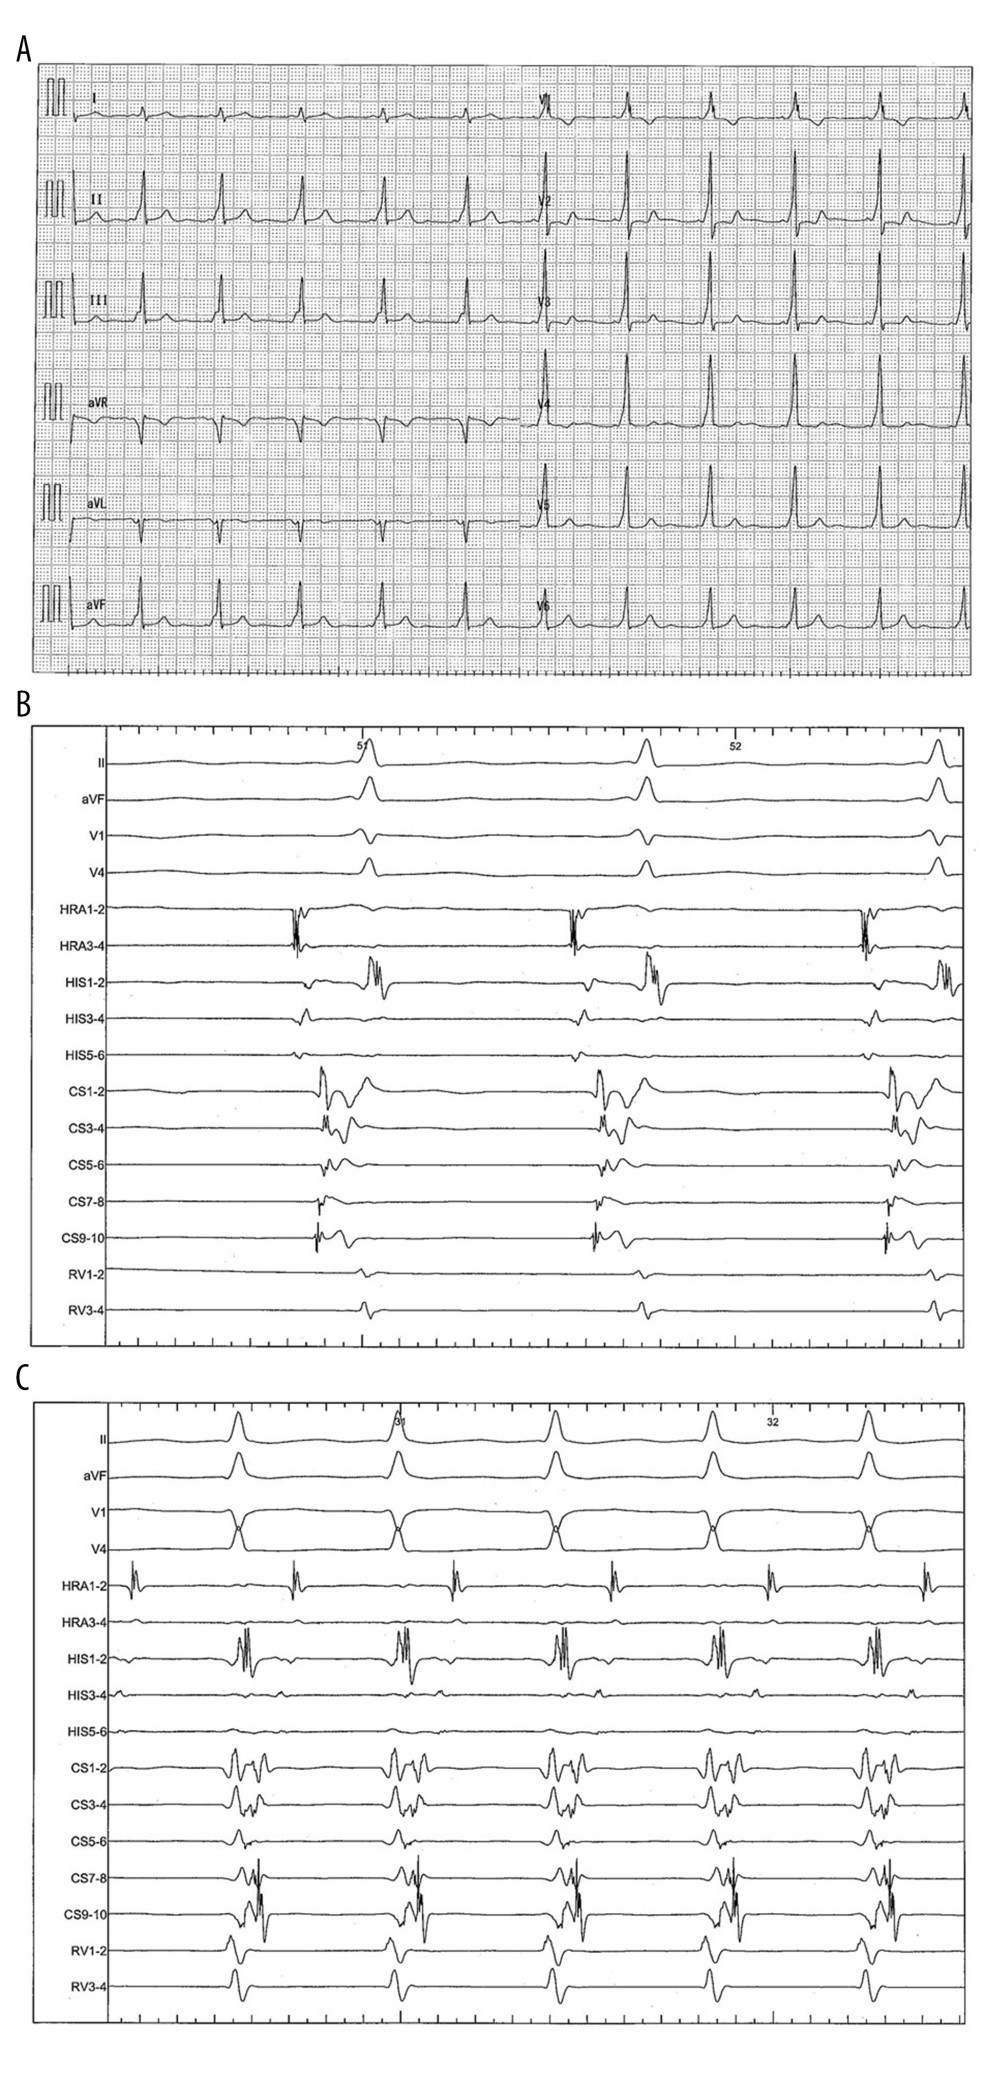 Type A Wolff-Parkinson-White (WPW) syndrome in Case 2. (A) Twelve-lead surface electrocardiogram (ECG) findings consistent with type A WPW syndrome. (B) Mapping of intracardiac potentials revealed that the site of earliest activation was adjacent to the lateral mitral annulus in an accessory pathway with antegrade conduction. (C) Atrioventricular reciprocating tachycardia was easily induced by programmed stimulation. HRA – high right atrium; CS – coronary sinus (1–2 distal; 9–10 proximal); paper speed 100 mm/s.